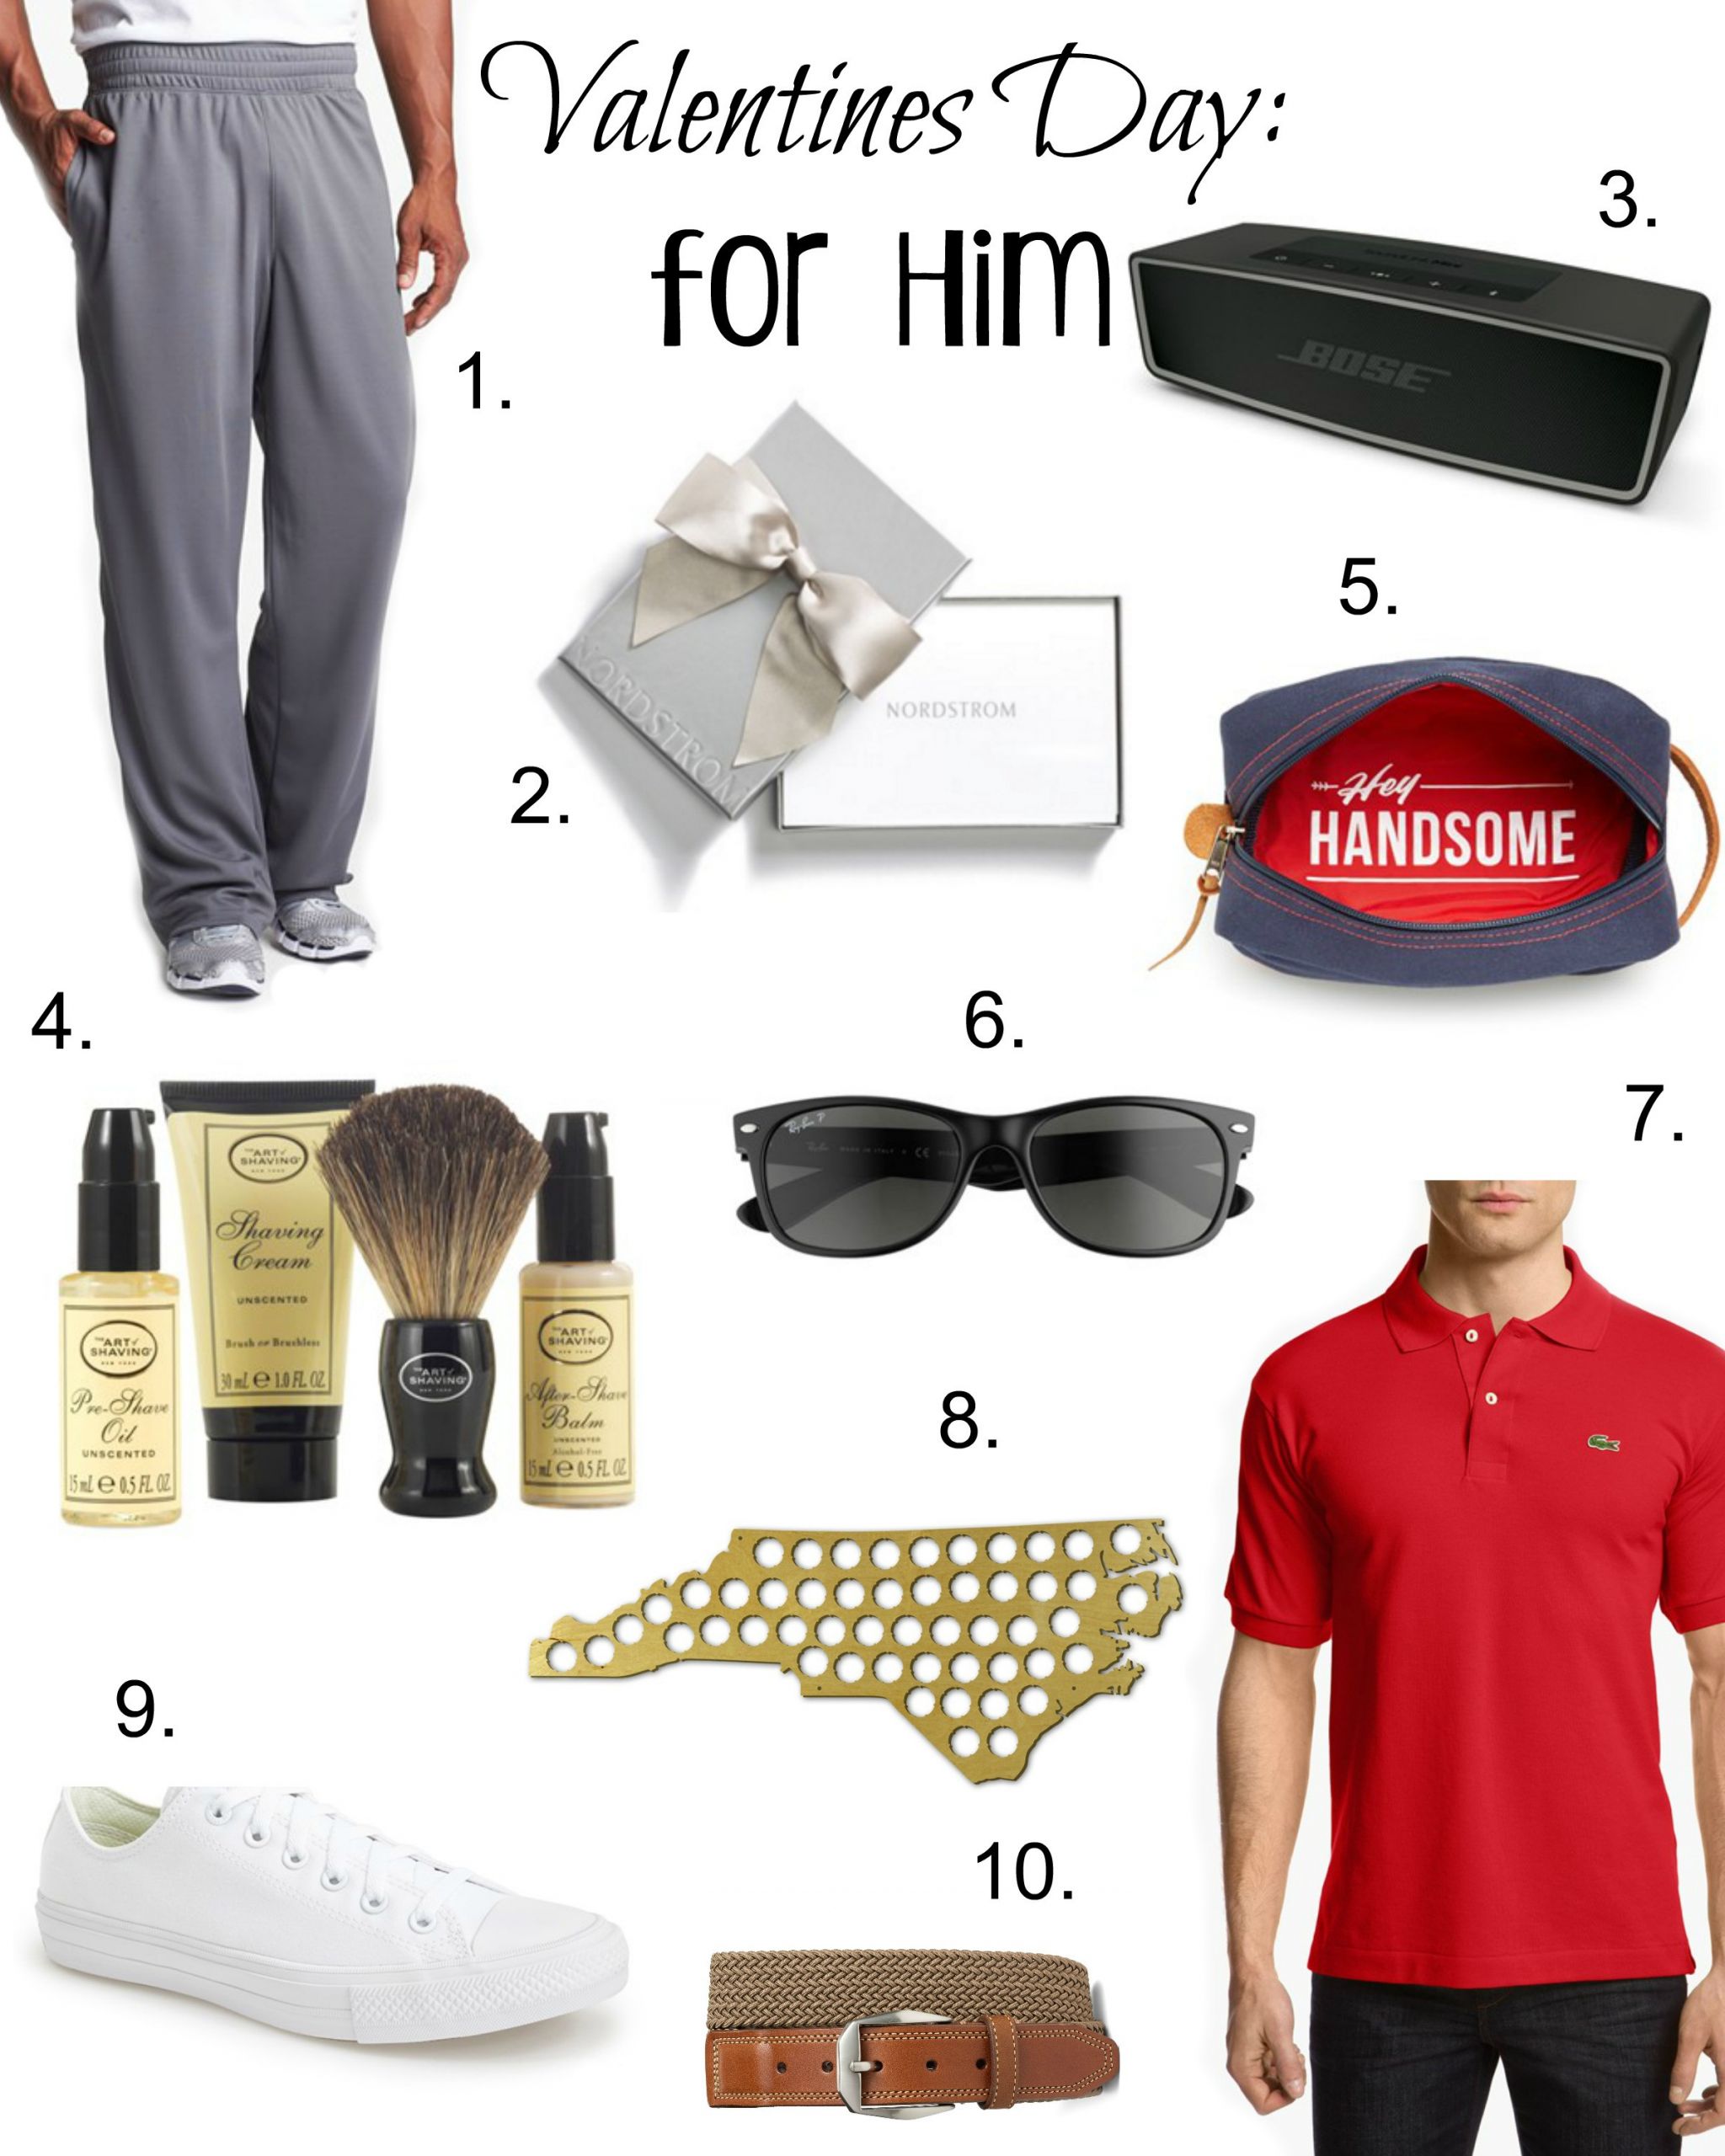 Popular Valentines Day Gifts
 Top 10 Valentines Day Gifts For Him